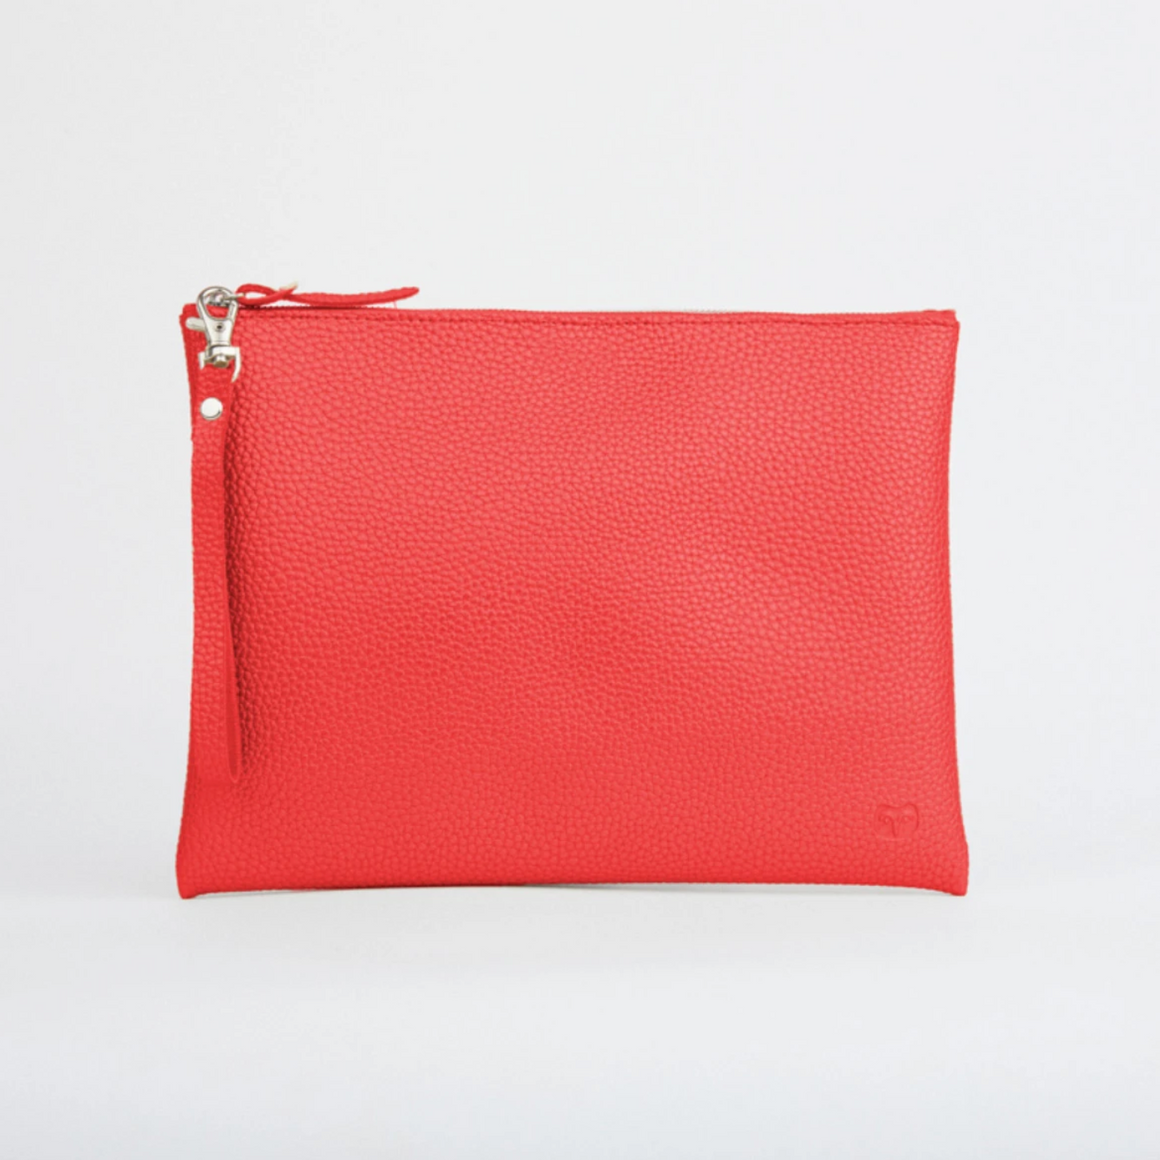 PERUVIAN CLUTCH WITH HANDLE - RED